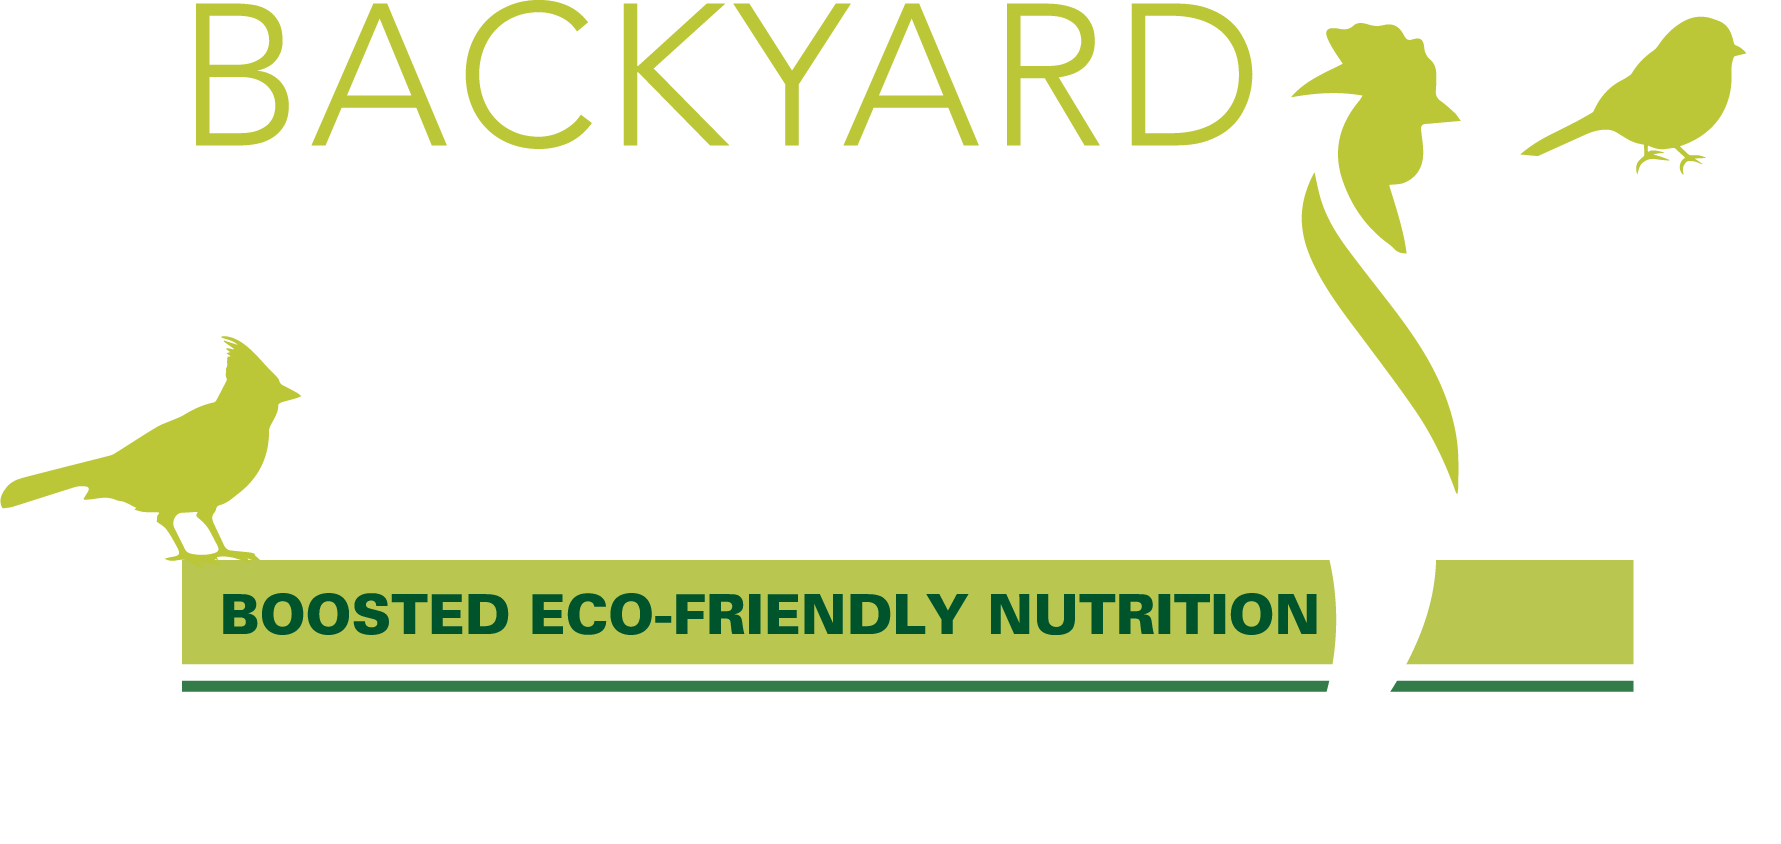 Backyard Boost: Boosted Eco-Friendly Nutrition